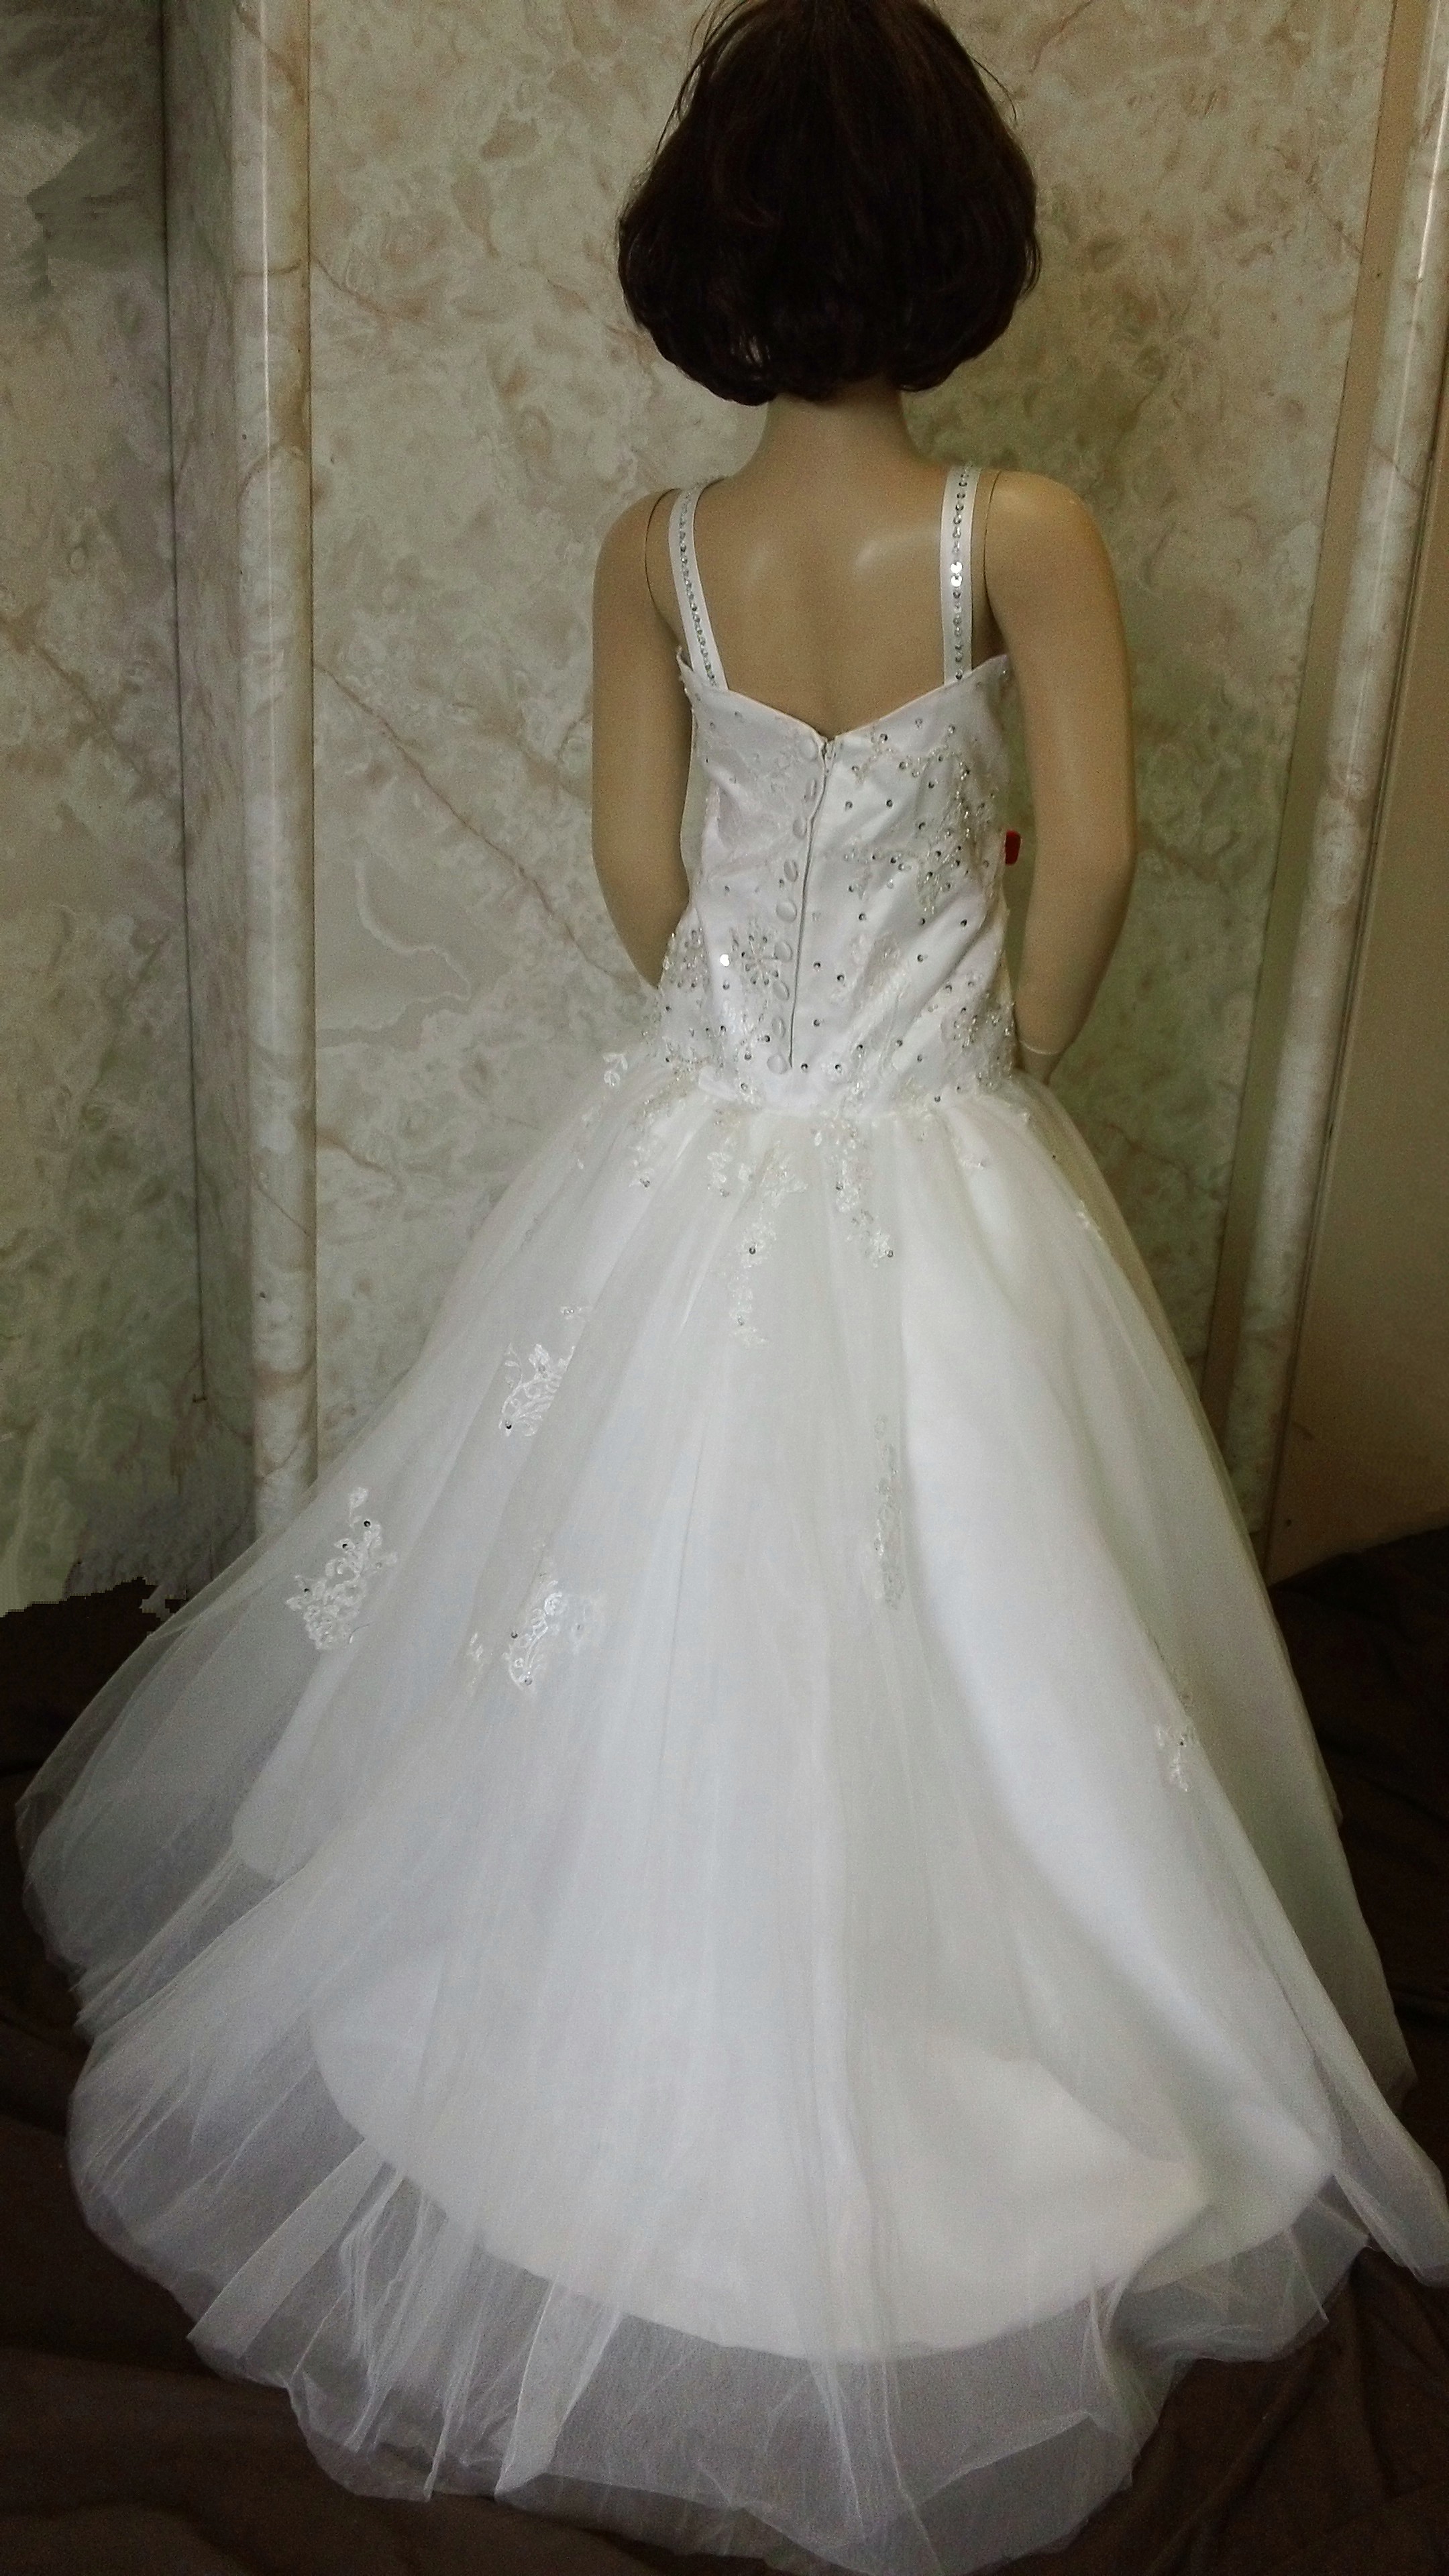 Minature wedding gown with train